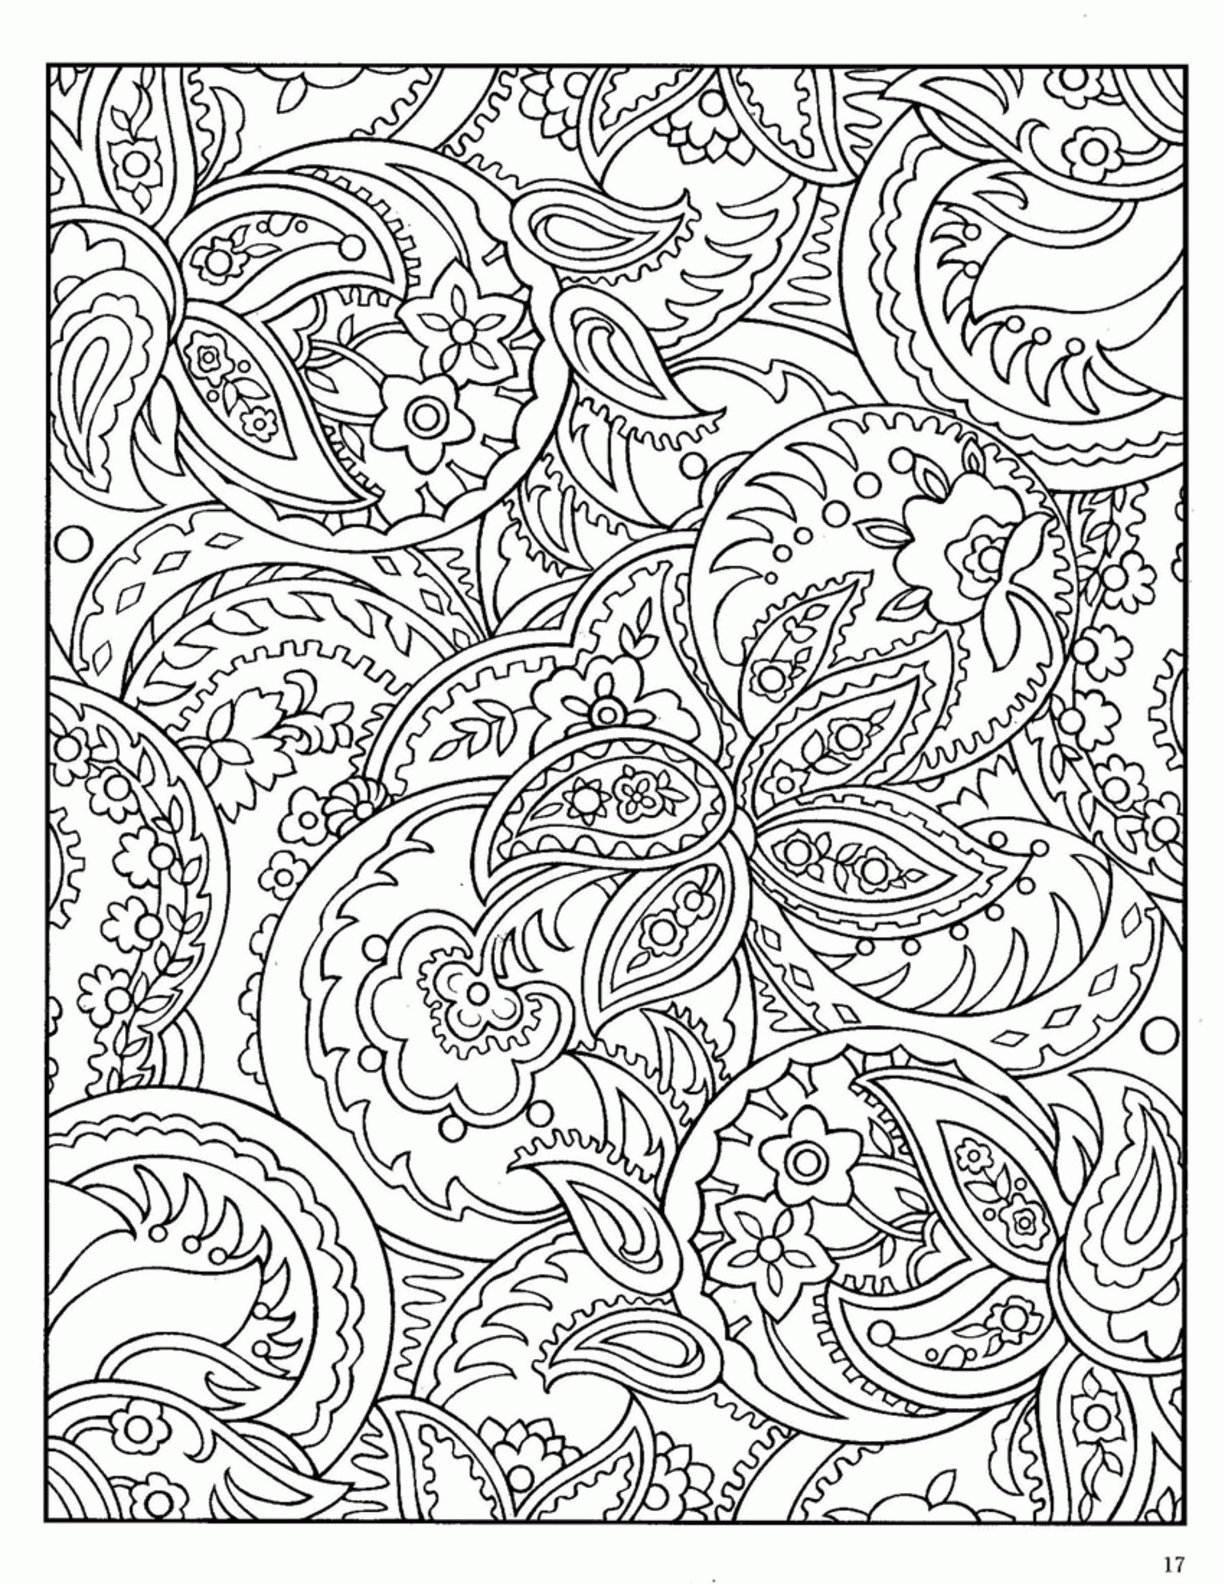 Coloring Pages Hard Patterns - Coloring Page